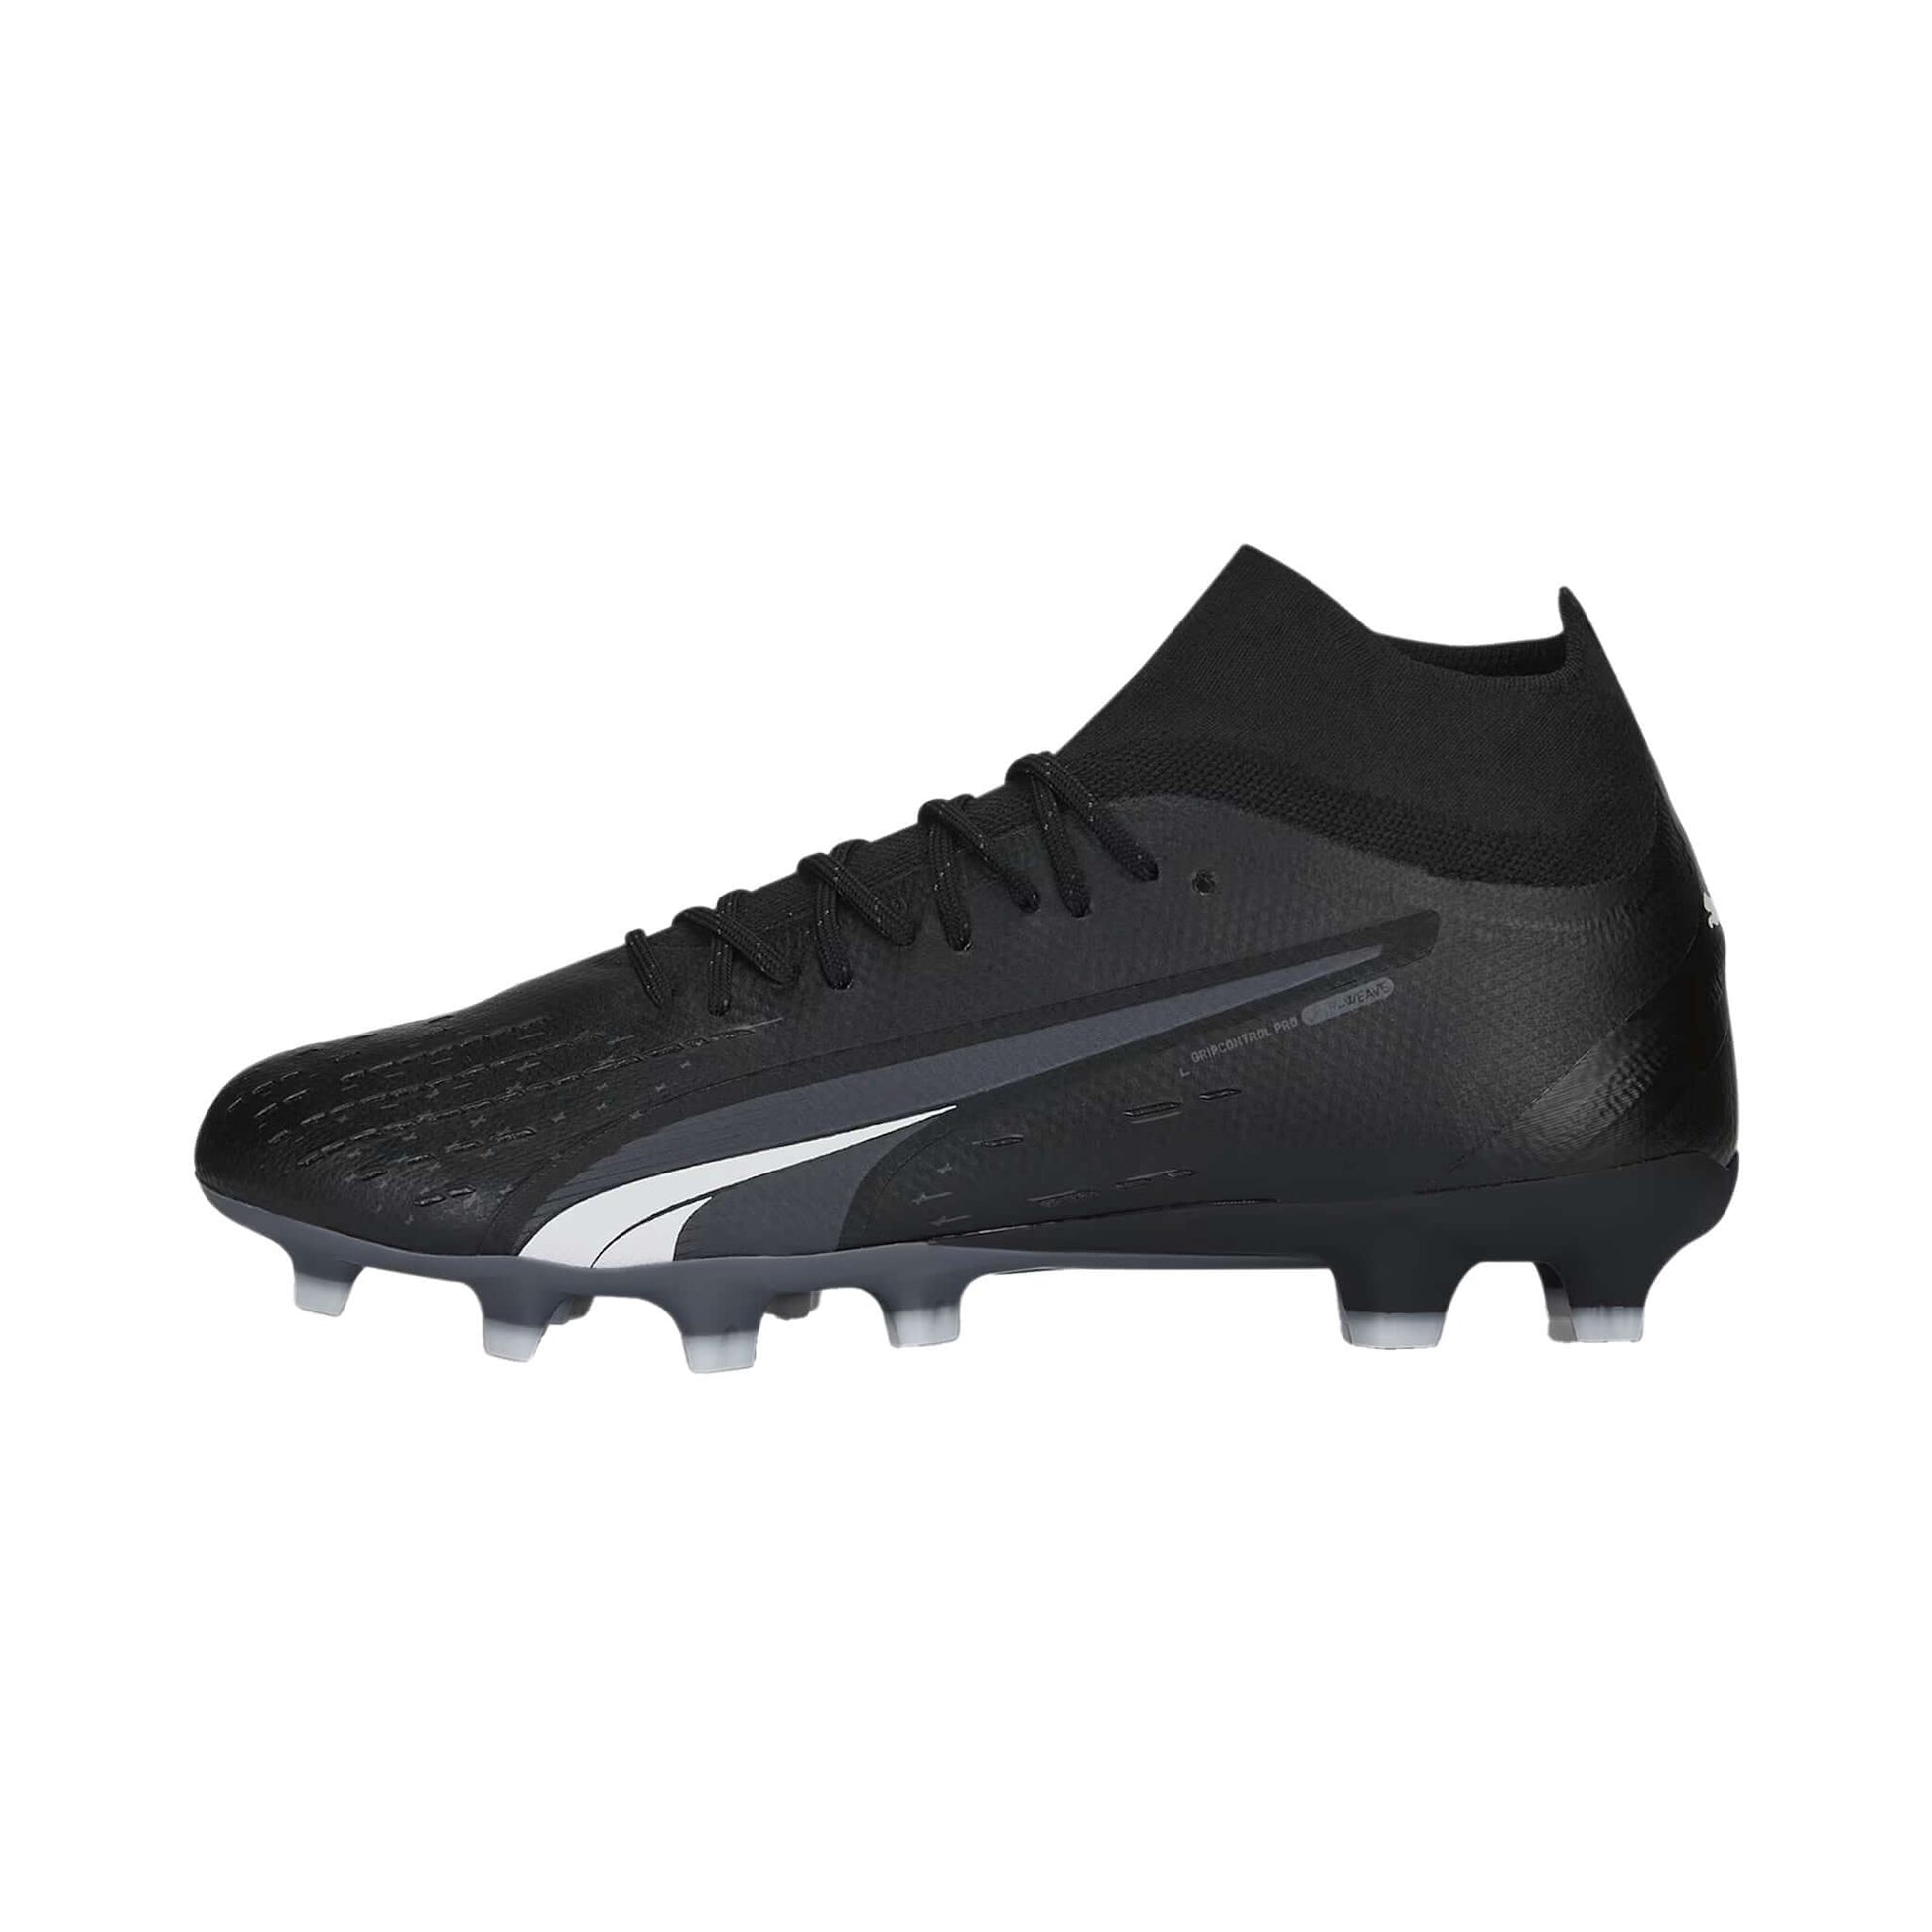 Ultra Pro Firm & Artificial Ground Cleats | EvangelistaSports.com | Canada's Premiere Soccer Store